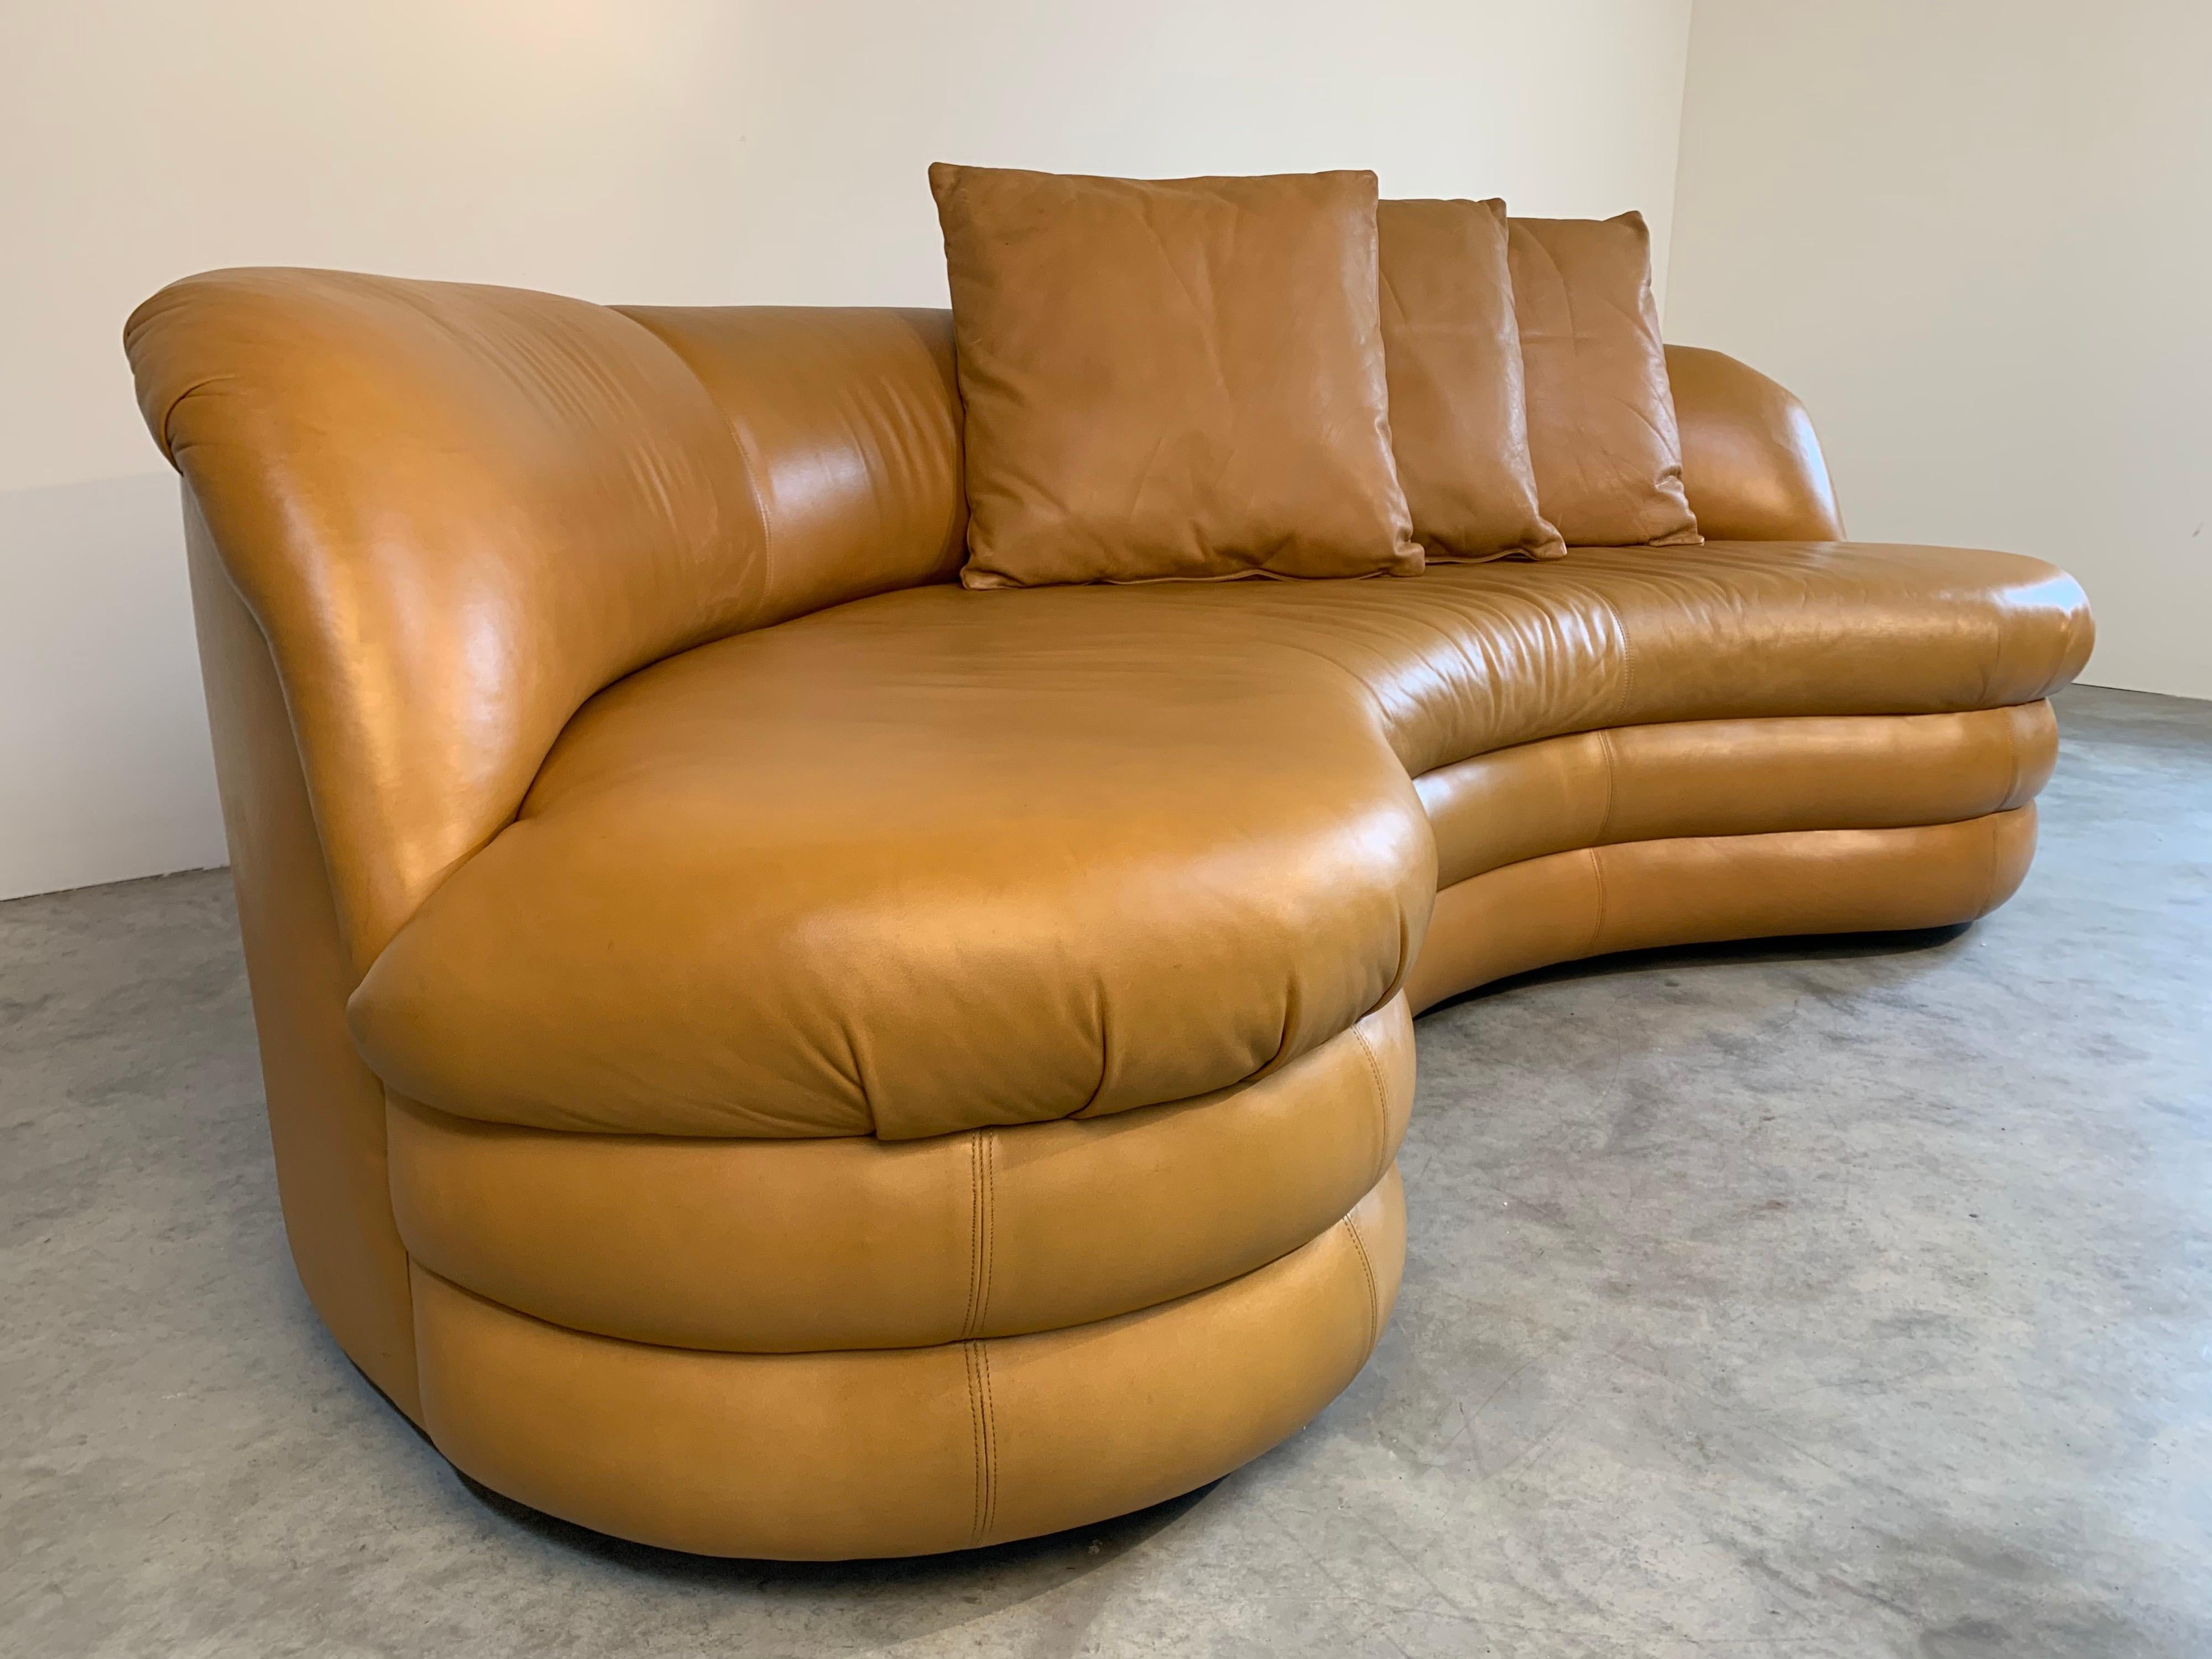 Directional sofa in beautiful caramel leather attributed to Vladimir Kagan, circa 1980.
Directional tag is underneath. Newly conditioned with Black Rock leather conditioner which is our absolute favorite treatment for leather. Clean, solid and